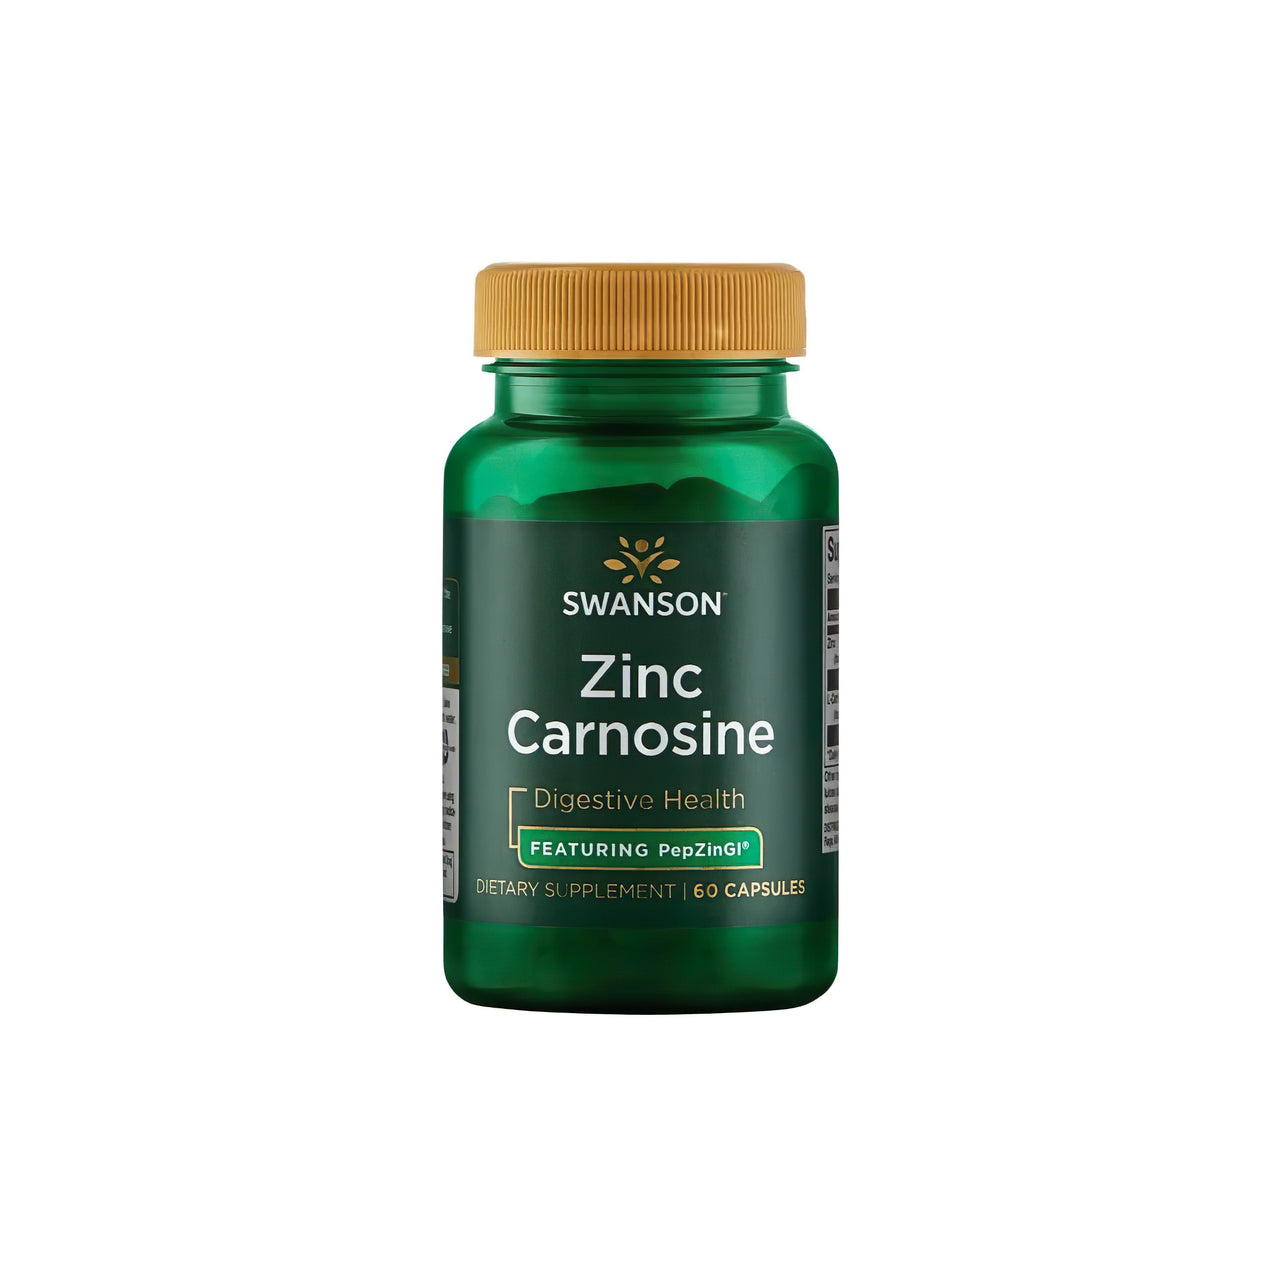 A dietary supplement for occasional stomach discomfort, containing Zinc Carnosine - Featuring PepZinGI 60 caps by Swanson.